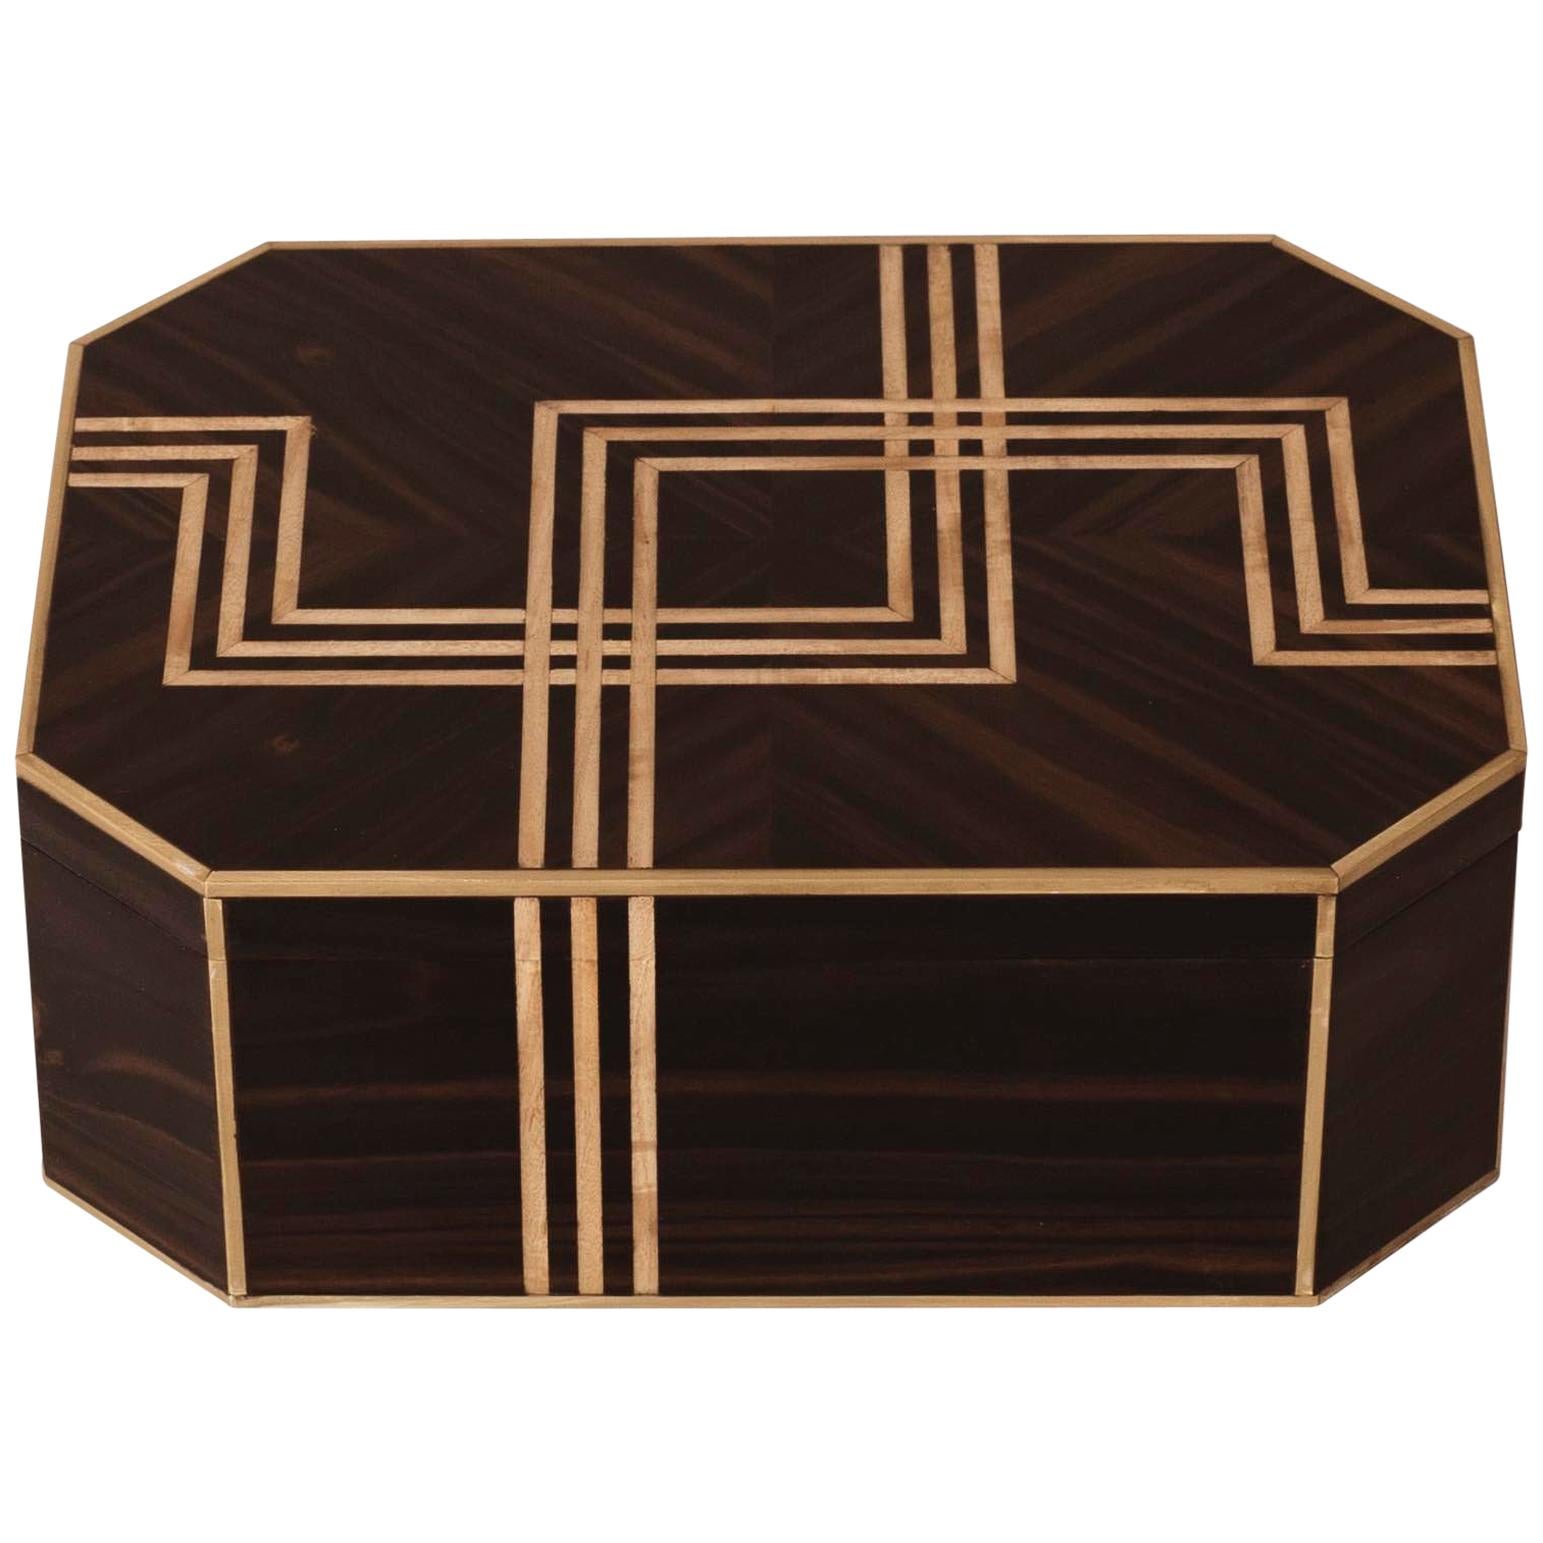 Art Deco Style Box with Ebony Veneer, with Inlays in Bronze and Springwood